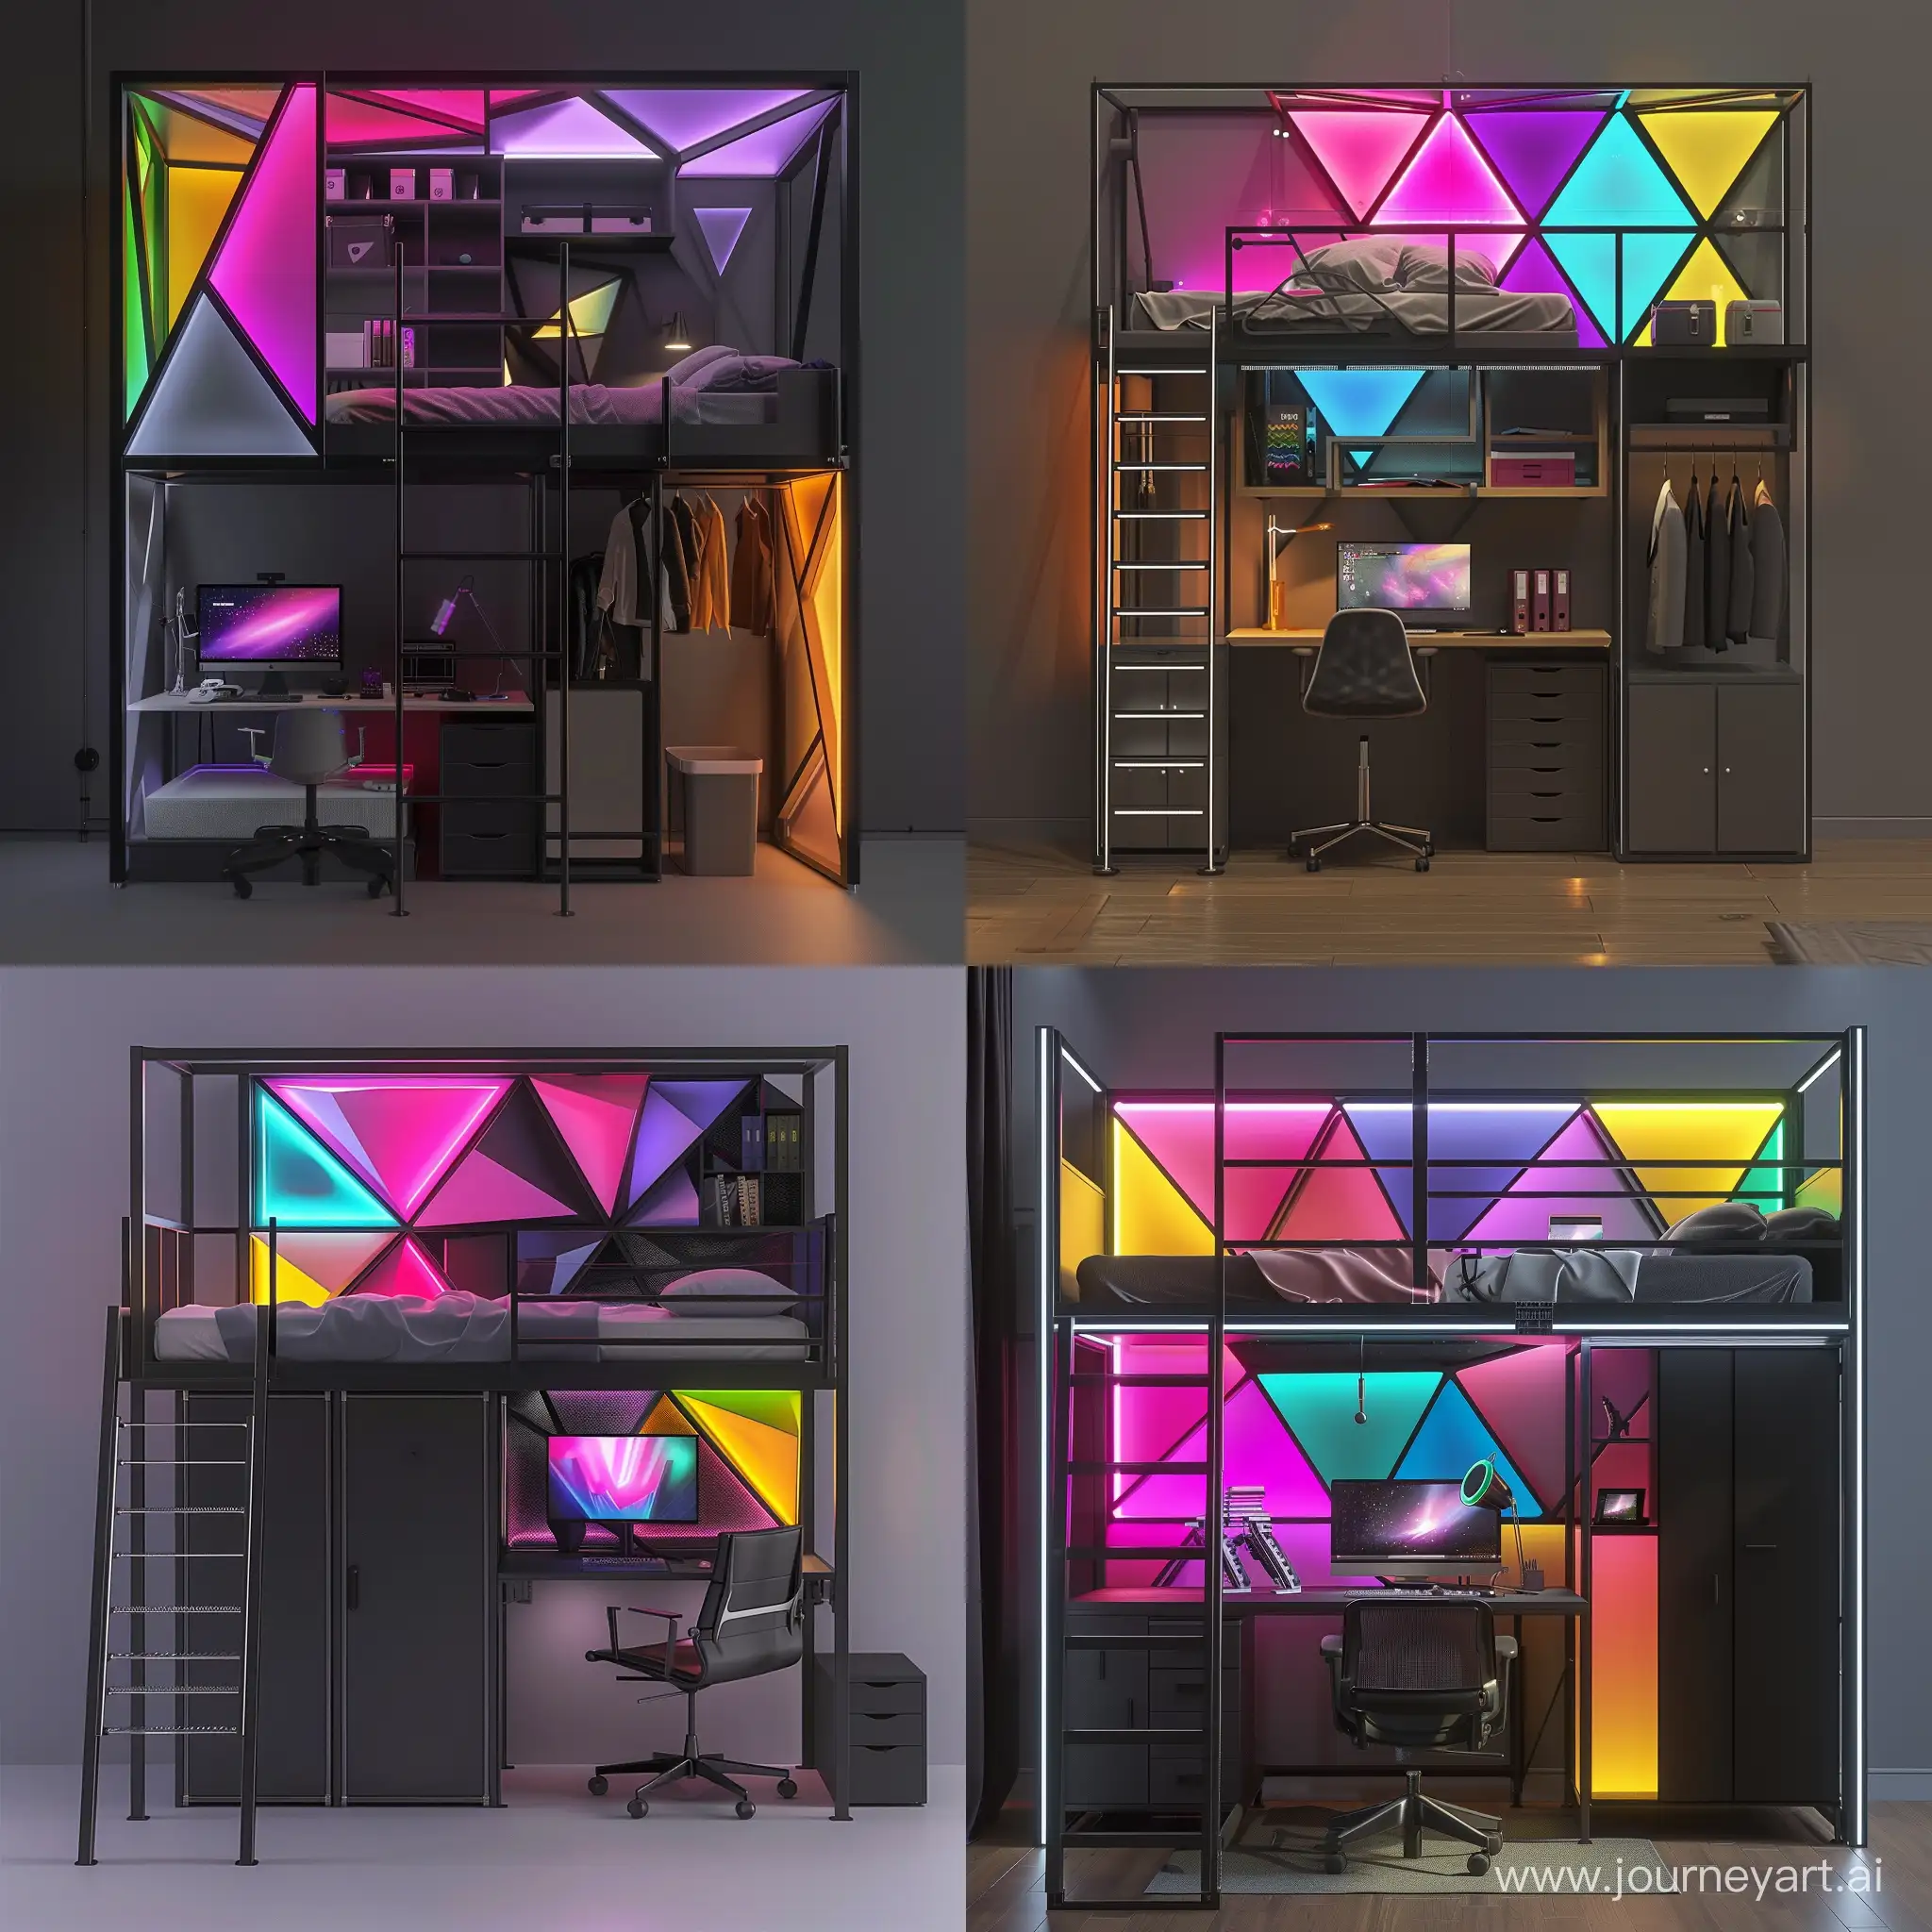 A unit for gamers containing tow levels , in the first level a bed 10 centimeters high from the ground. a ladder that leads to an second upper part without bed that contains desk with a computer and chair, wardrobe next to it. The structure of the unit is made of iron in a simple modern style. It contains strong lighting  in geometry shapes in bright pink, purple ,blue ,green ,yellow ,orange colors. The dimensions of the unit are 3 meters and 150 cm, with a height of 3 meters. The colors of the unit are black and gray.